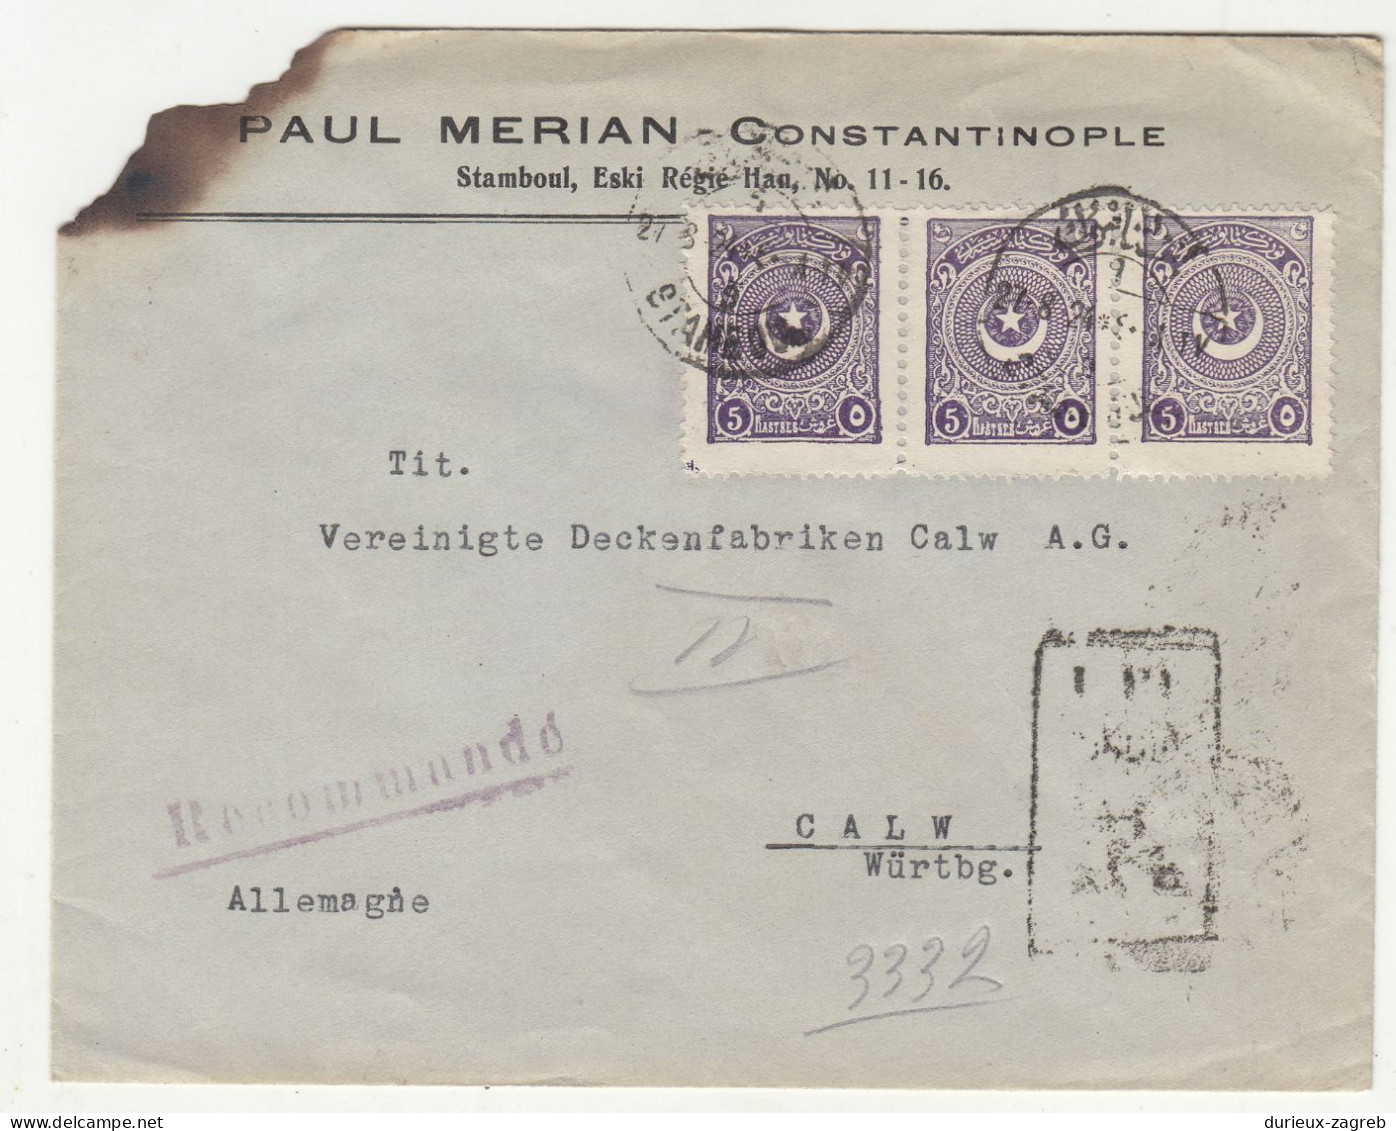 Paul Merian, Constantinople Company Letter Cover Posted Registered 1924 To Germany B230801 - Covers & Documents